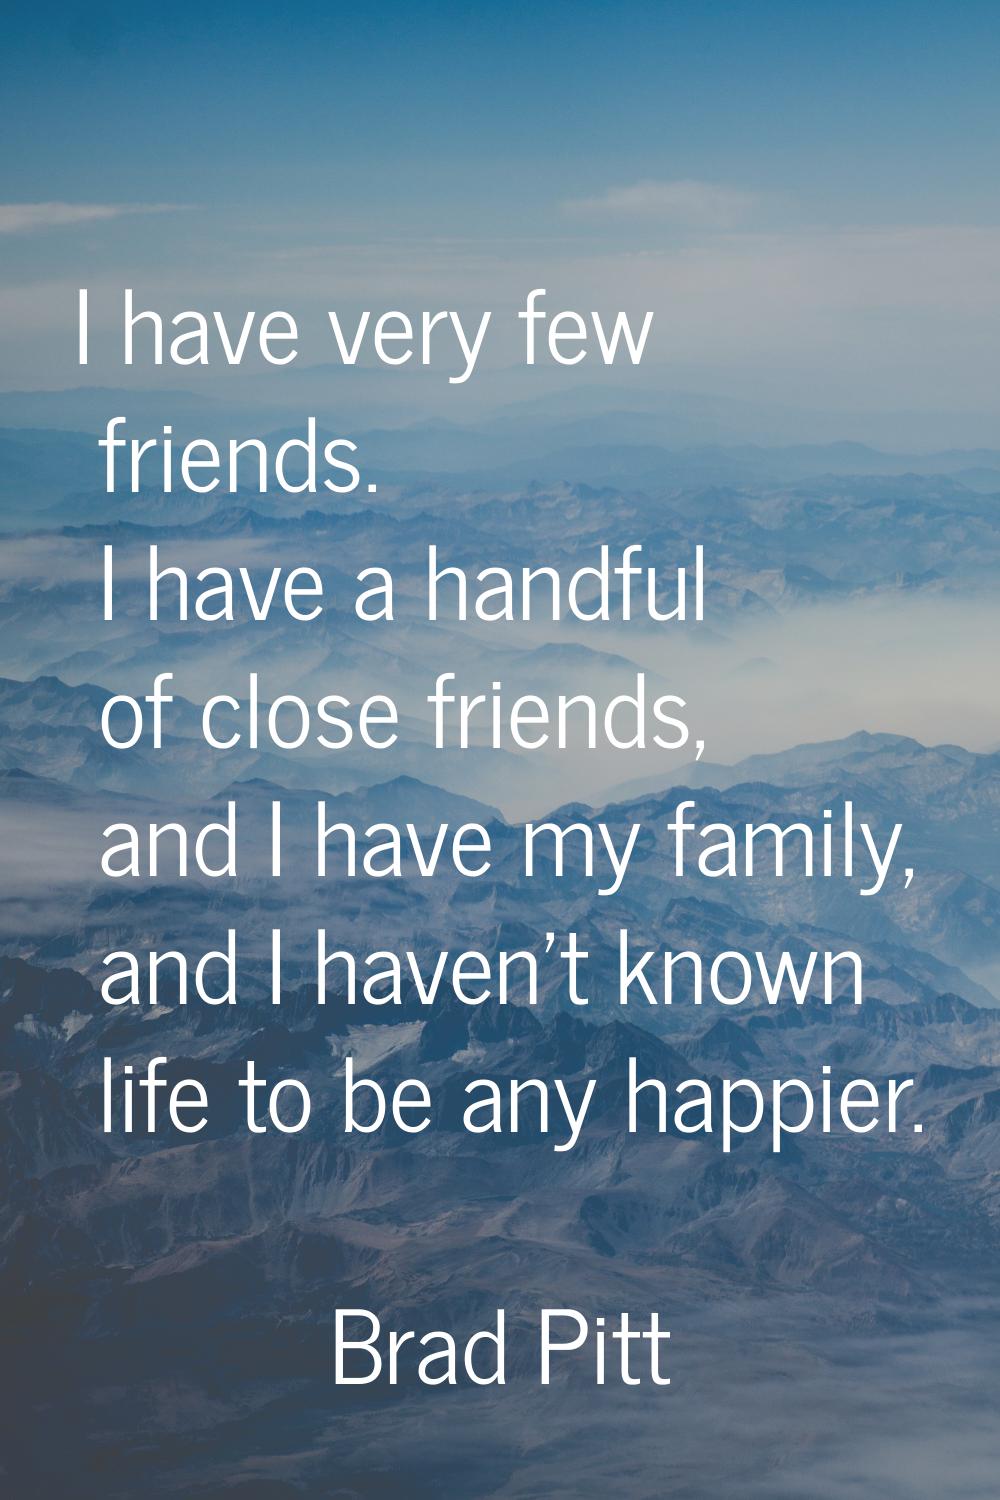 I have very few friends. I have a handful of close friends, and I have my family, and I haven't kno